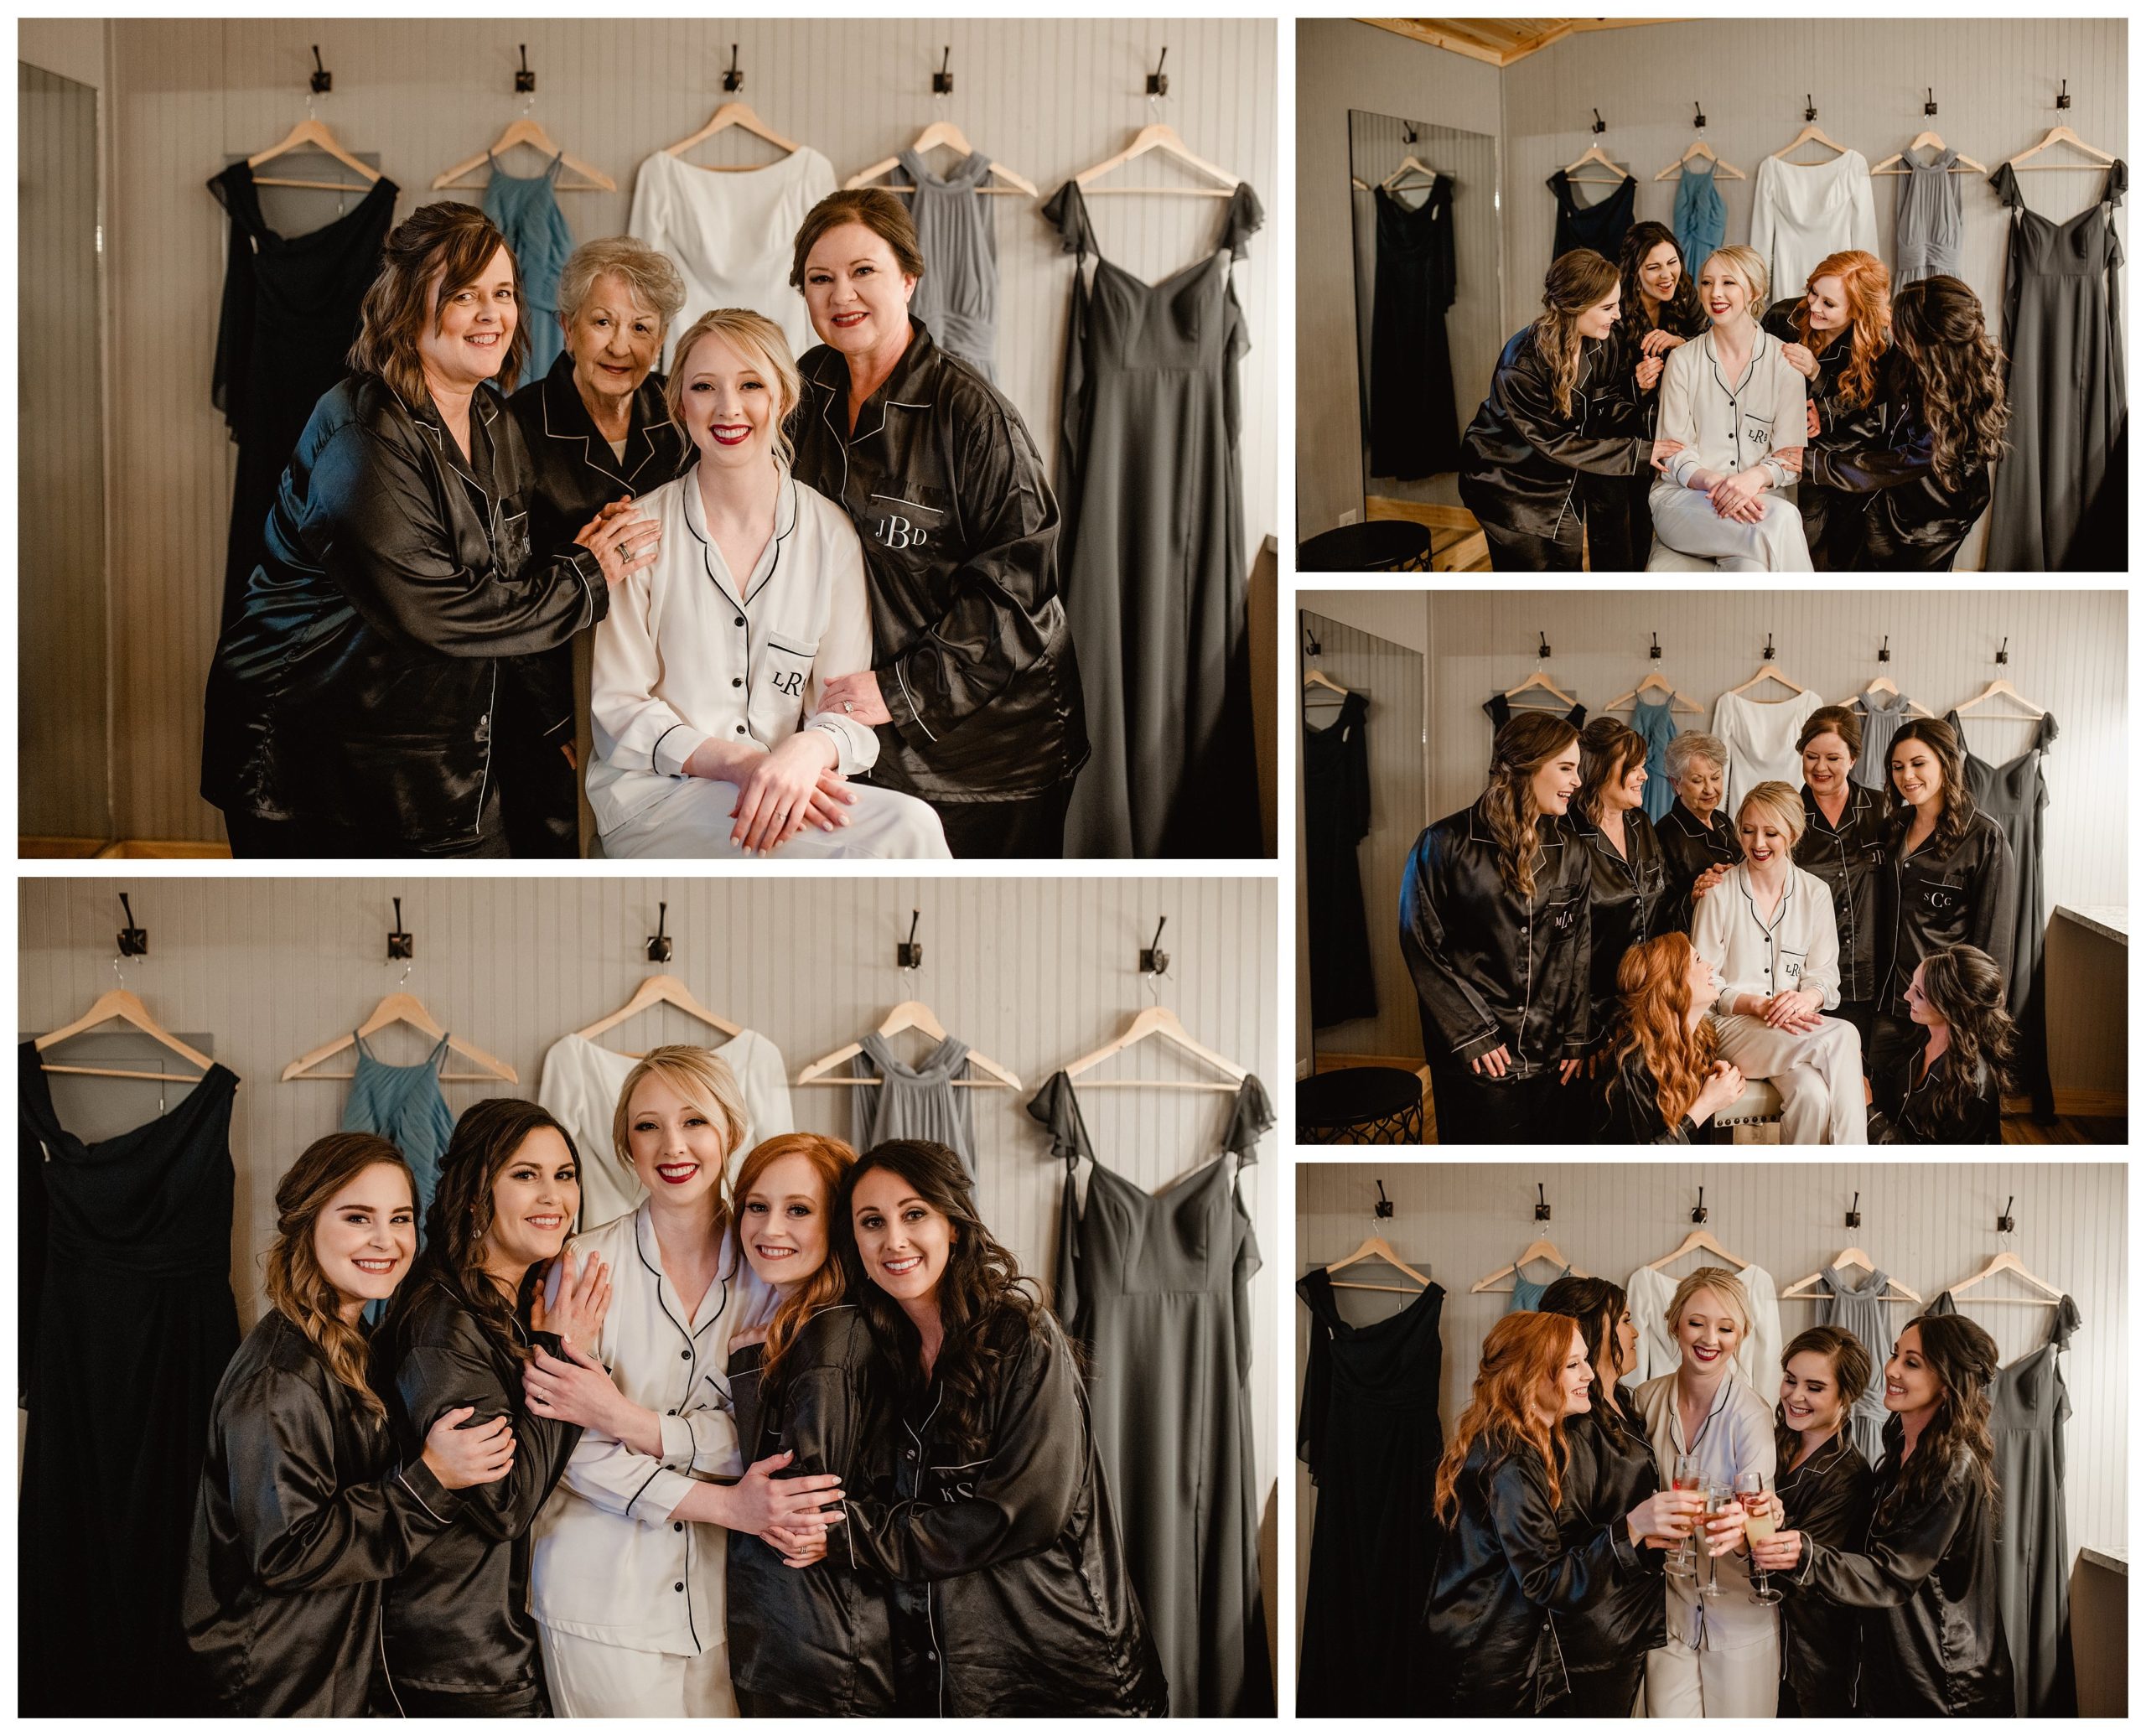 Clark plantation wedding photographer takes getting ready photos of bride and bridesmaids in pajamas - Shelly Williams Photography